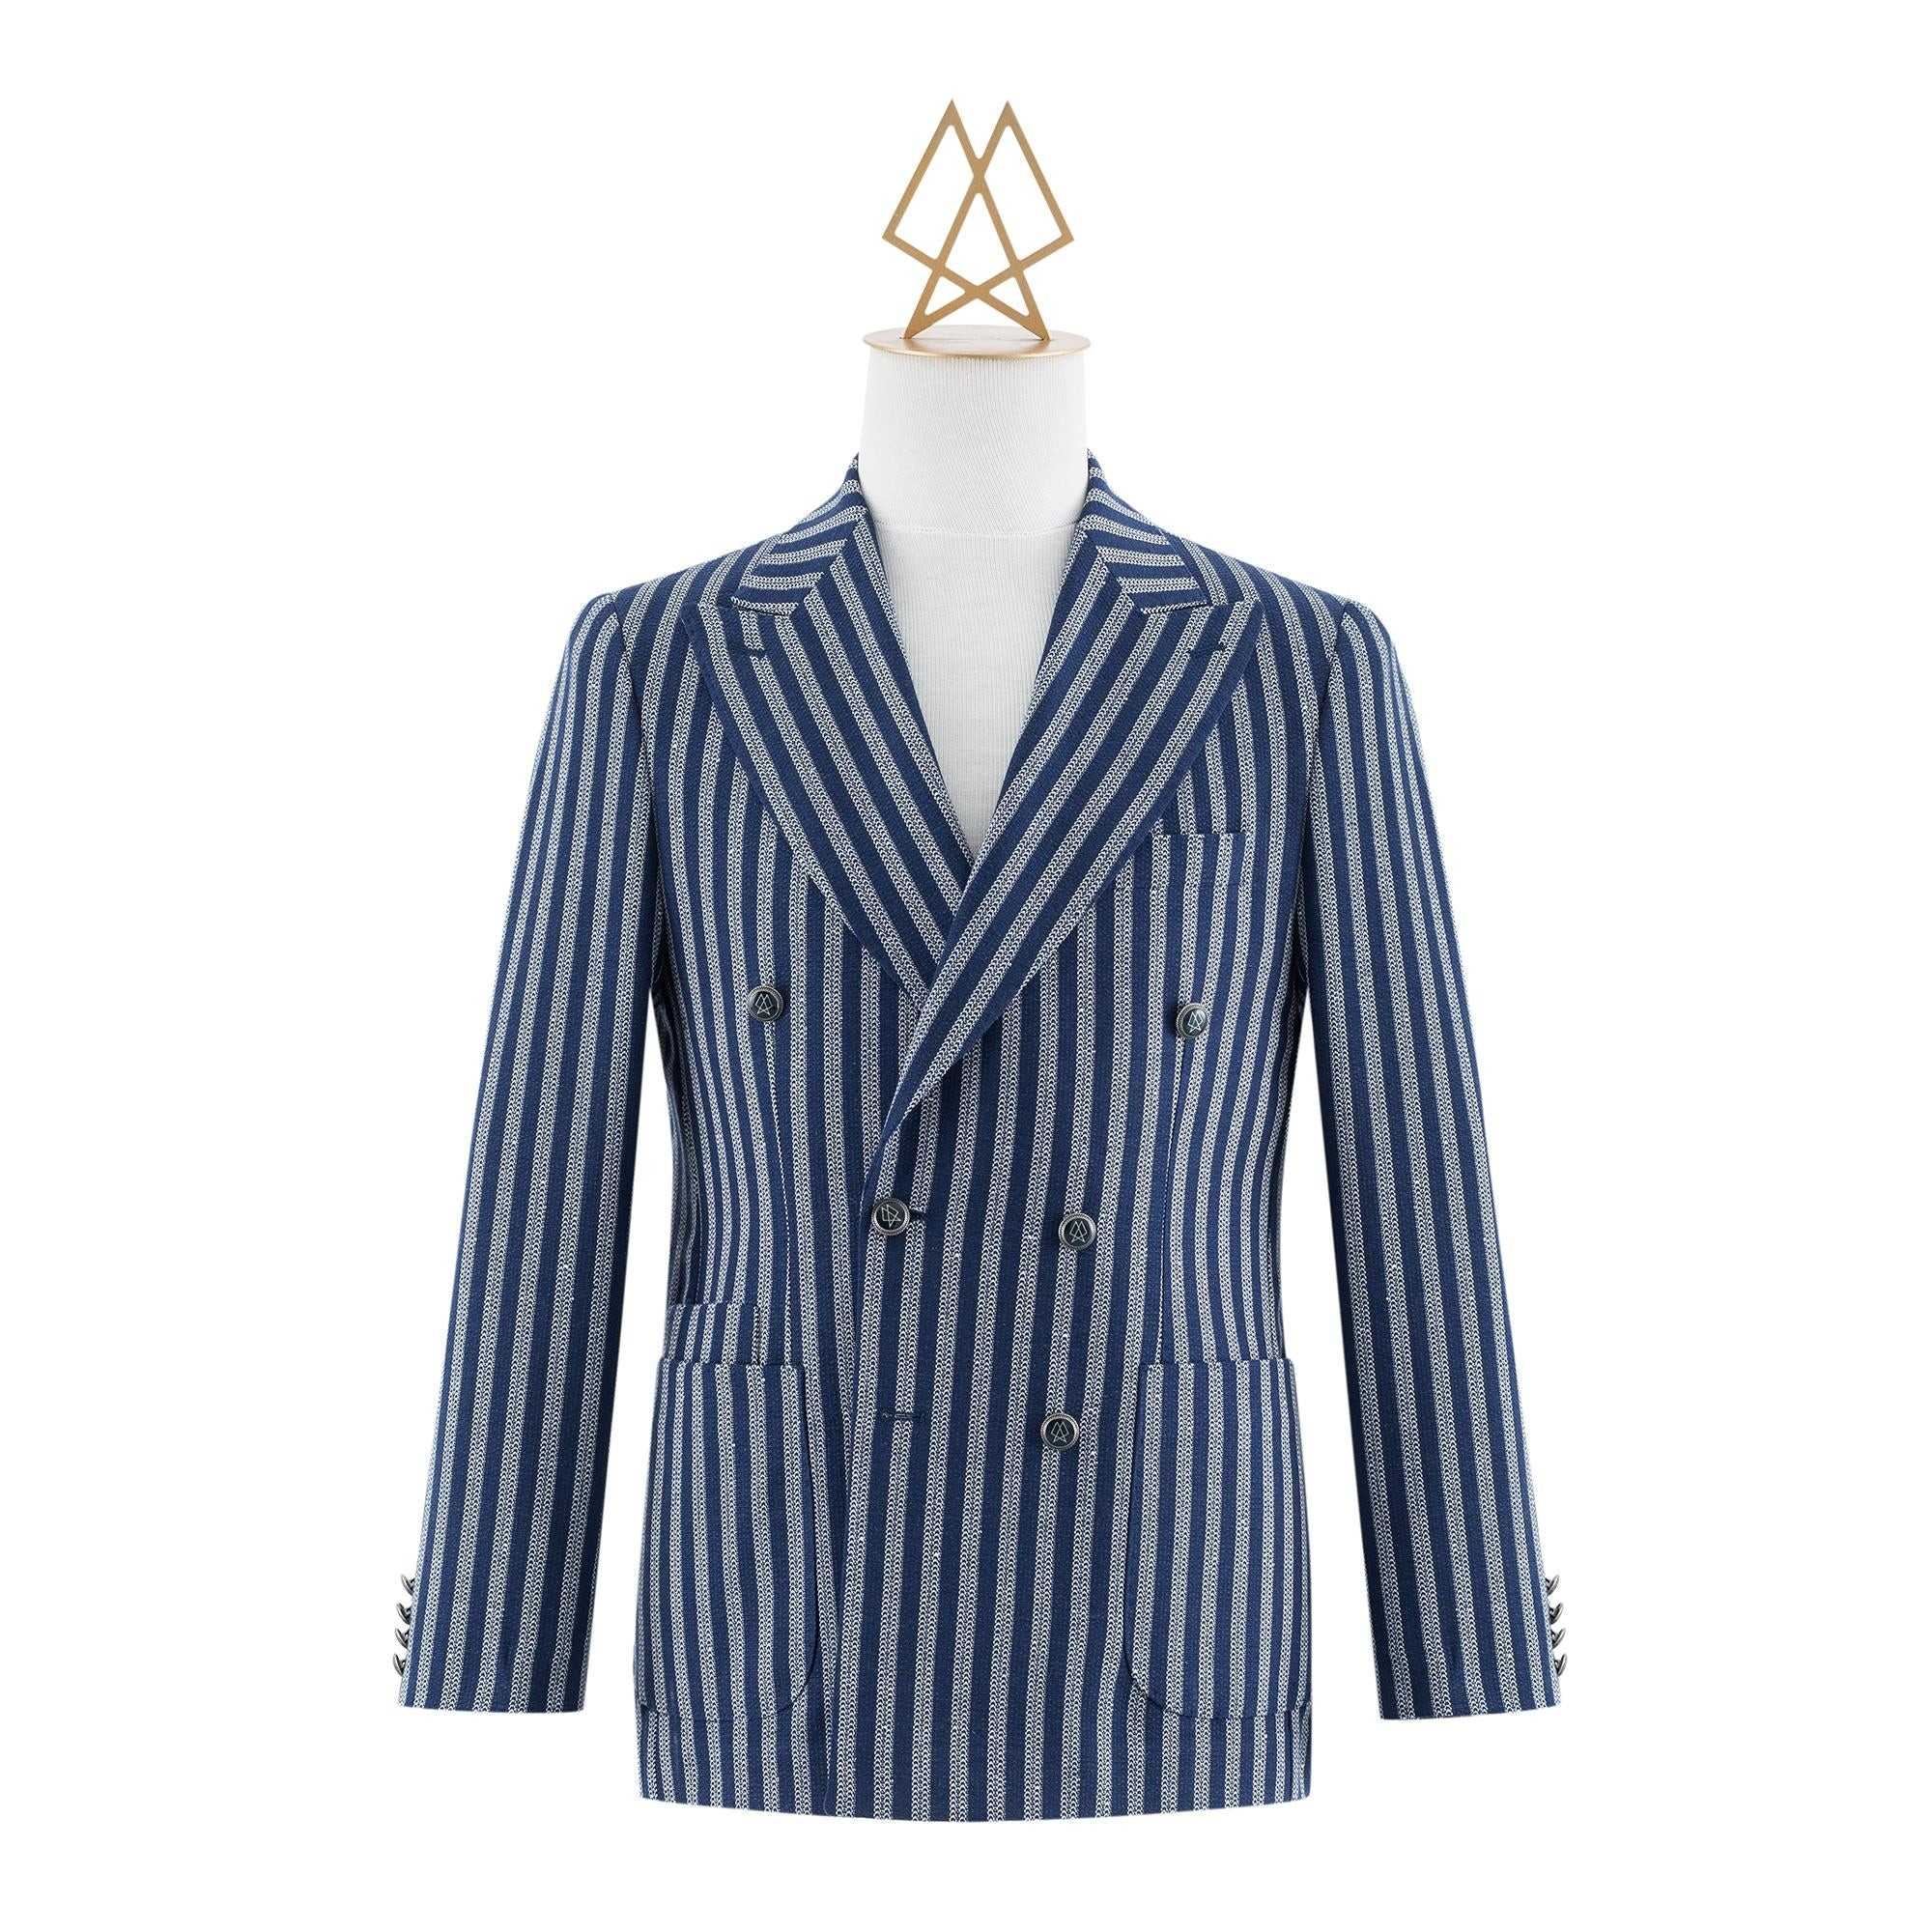 NAVY BLUE/WHITE STRIPED DOUBLE BREASTED JACKET